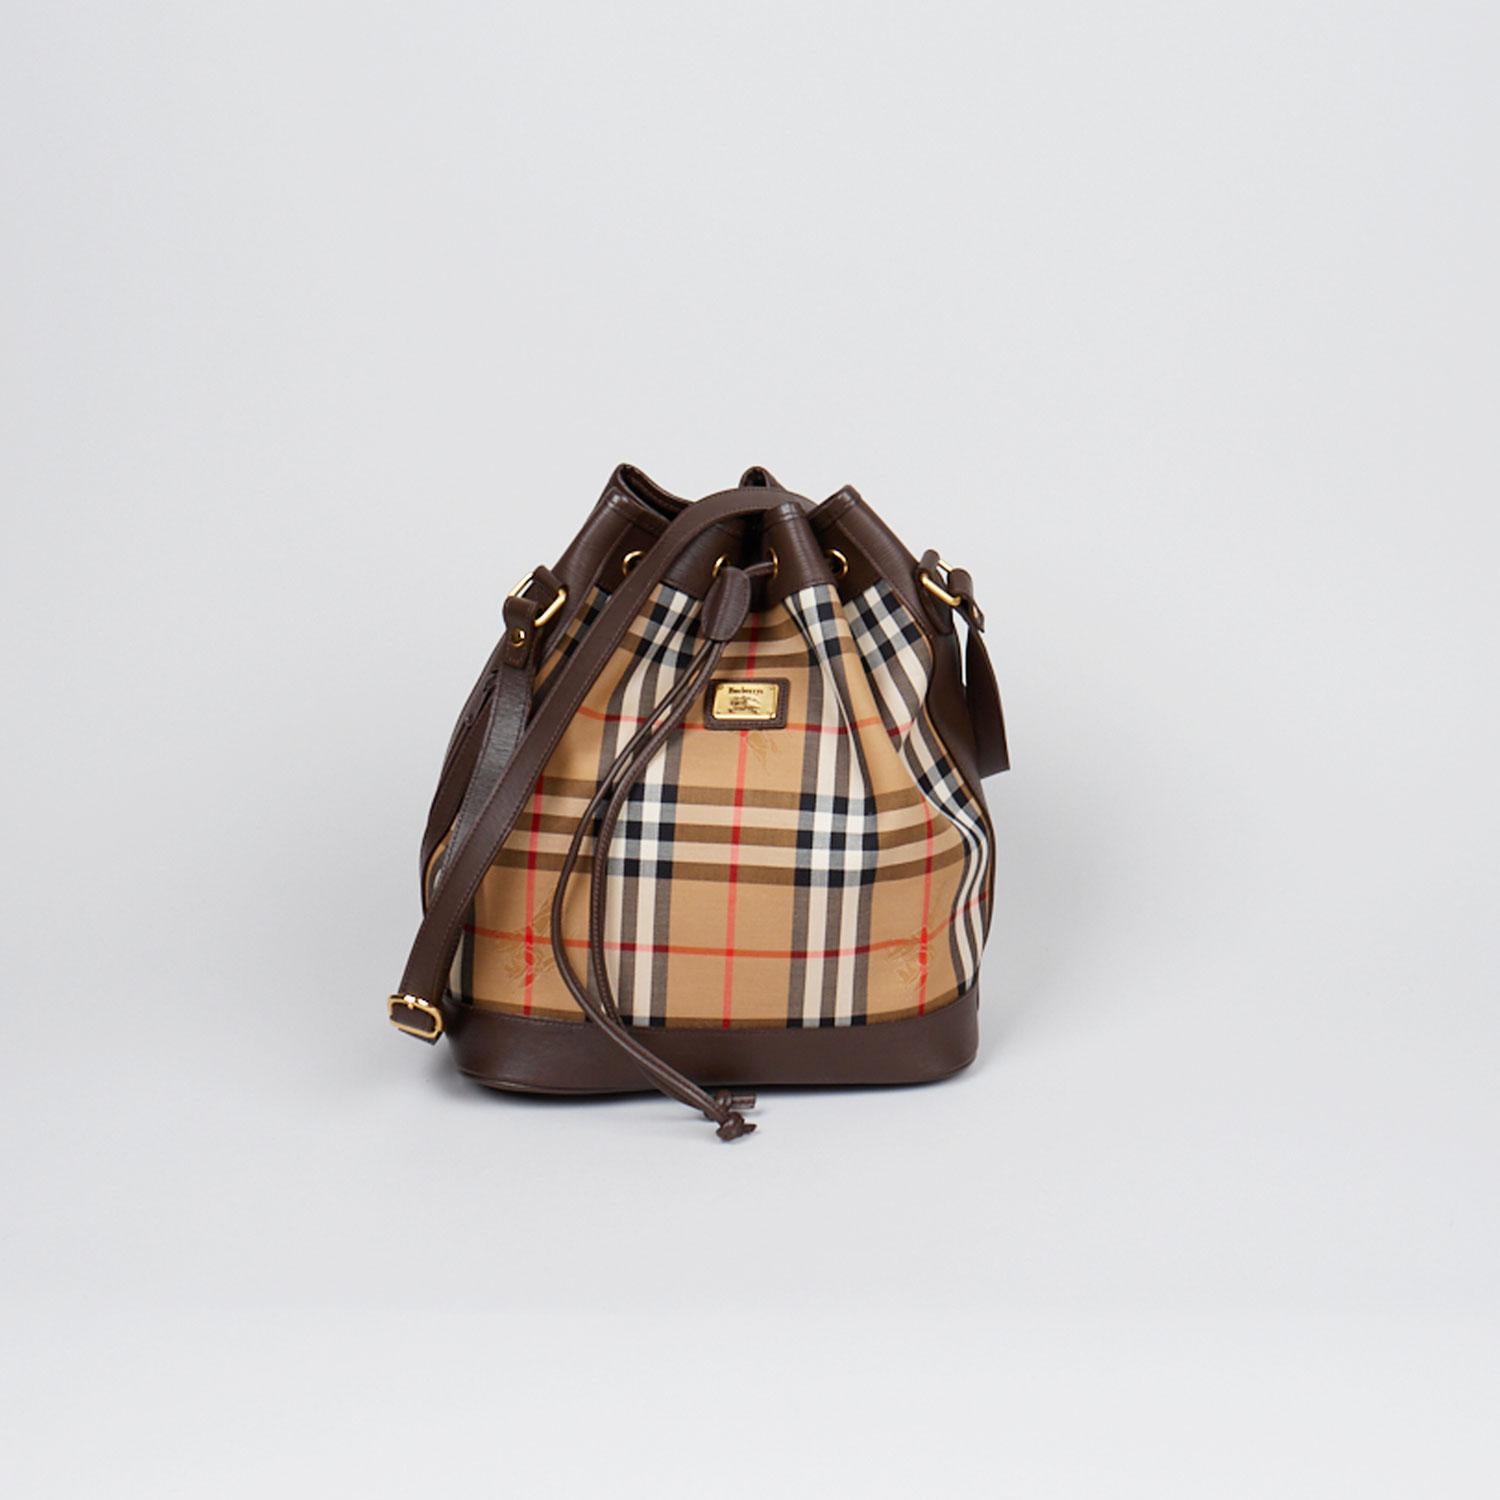 Tan and brown Horseferry Check canvas Burberry London bucket bag with

- Gold-tone hardware
- Adjustable flat shoulder strap
- Brown leather trim
- Chocolate leather lining, single pocket at interior wall and drawstring closure at top

Overall